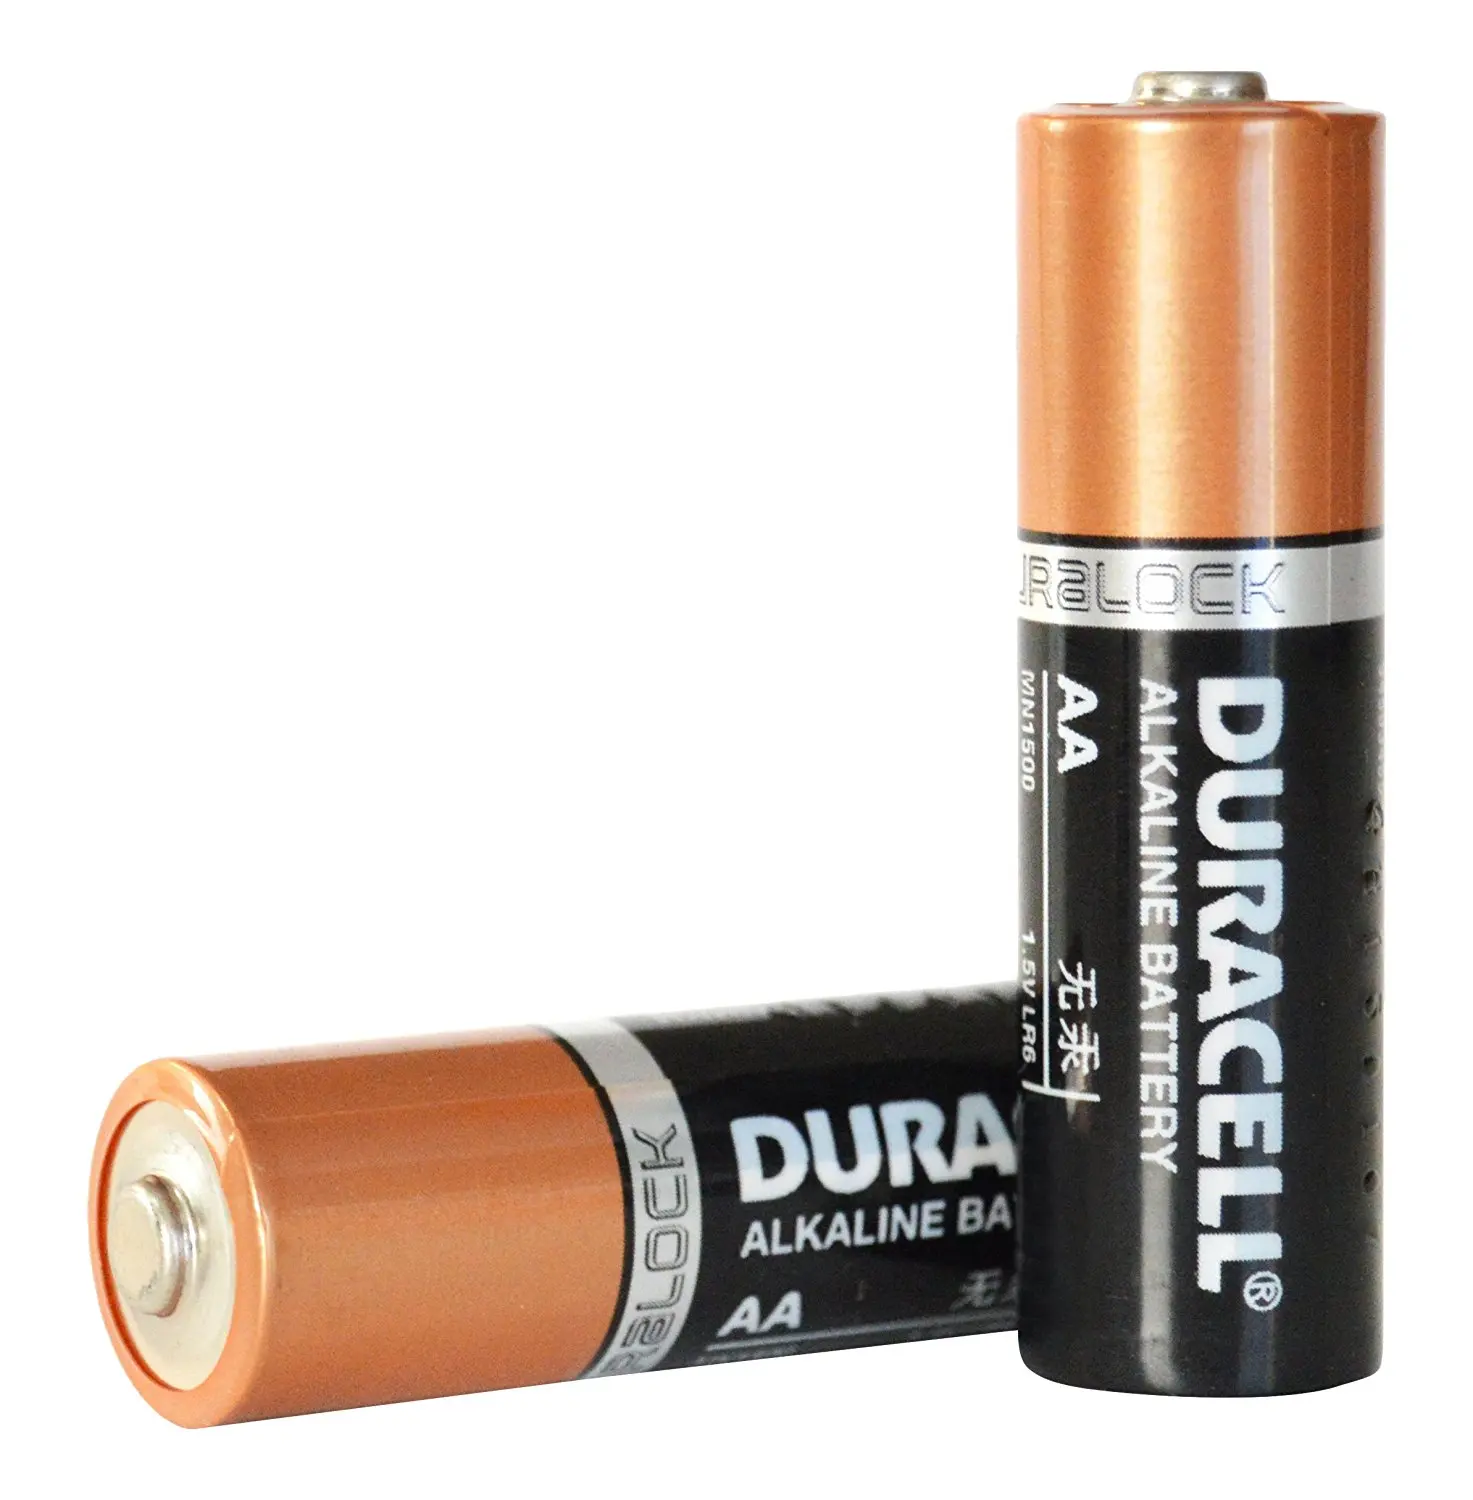 Aa battery. Батарейки Duracell АА. Duracell professional AA 4 шт. Duracell Rechargeable AA 1000. Duracell lr202bl.